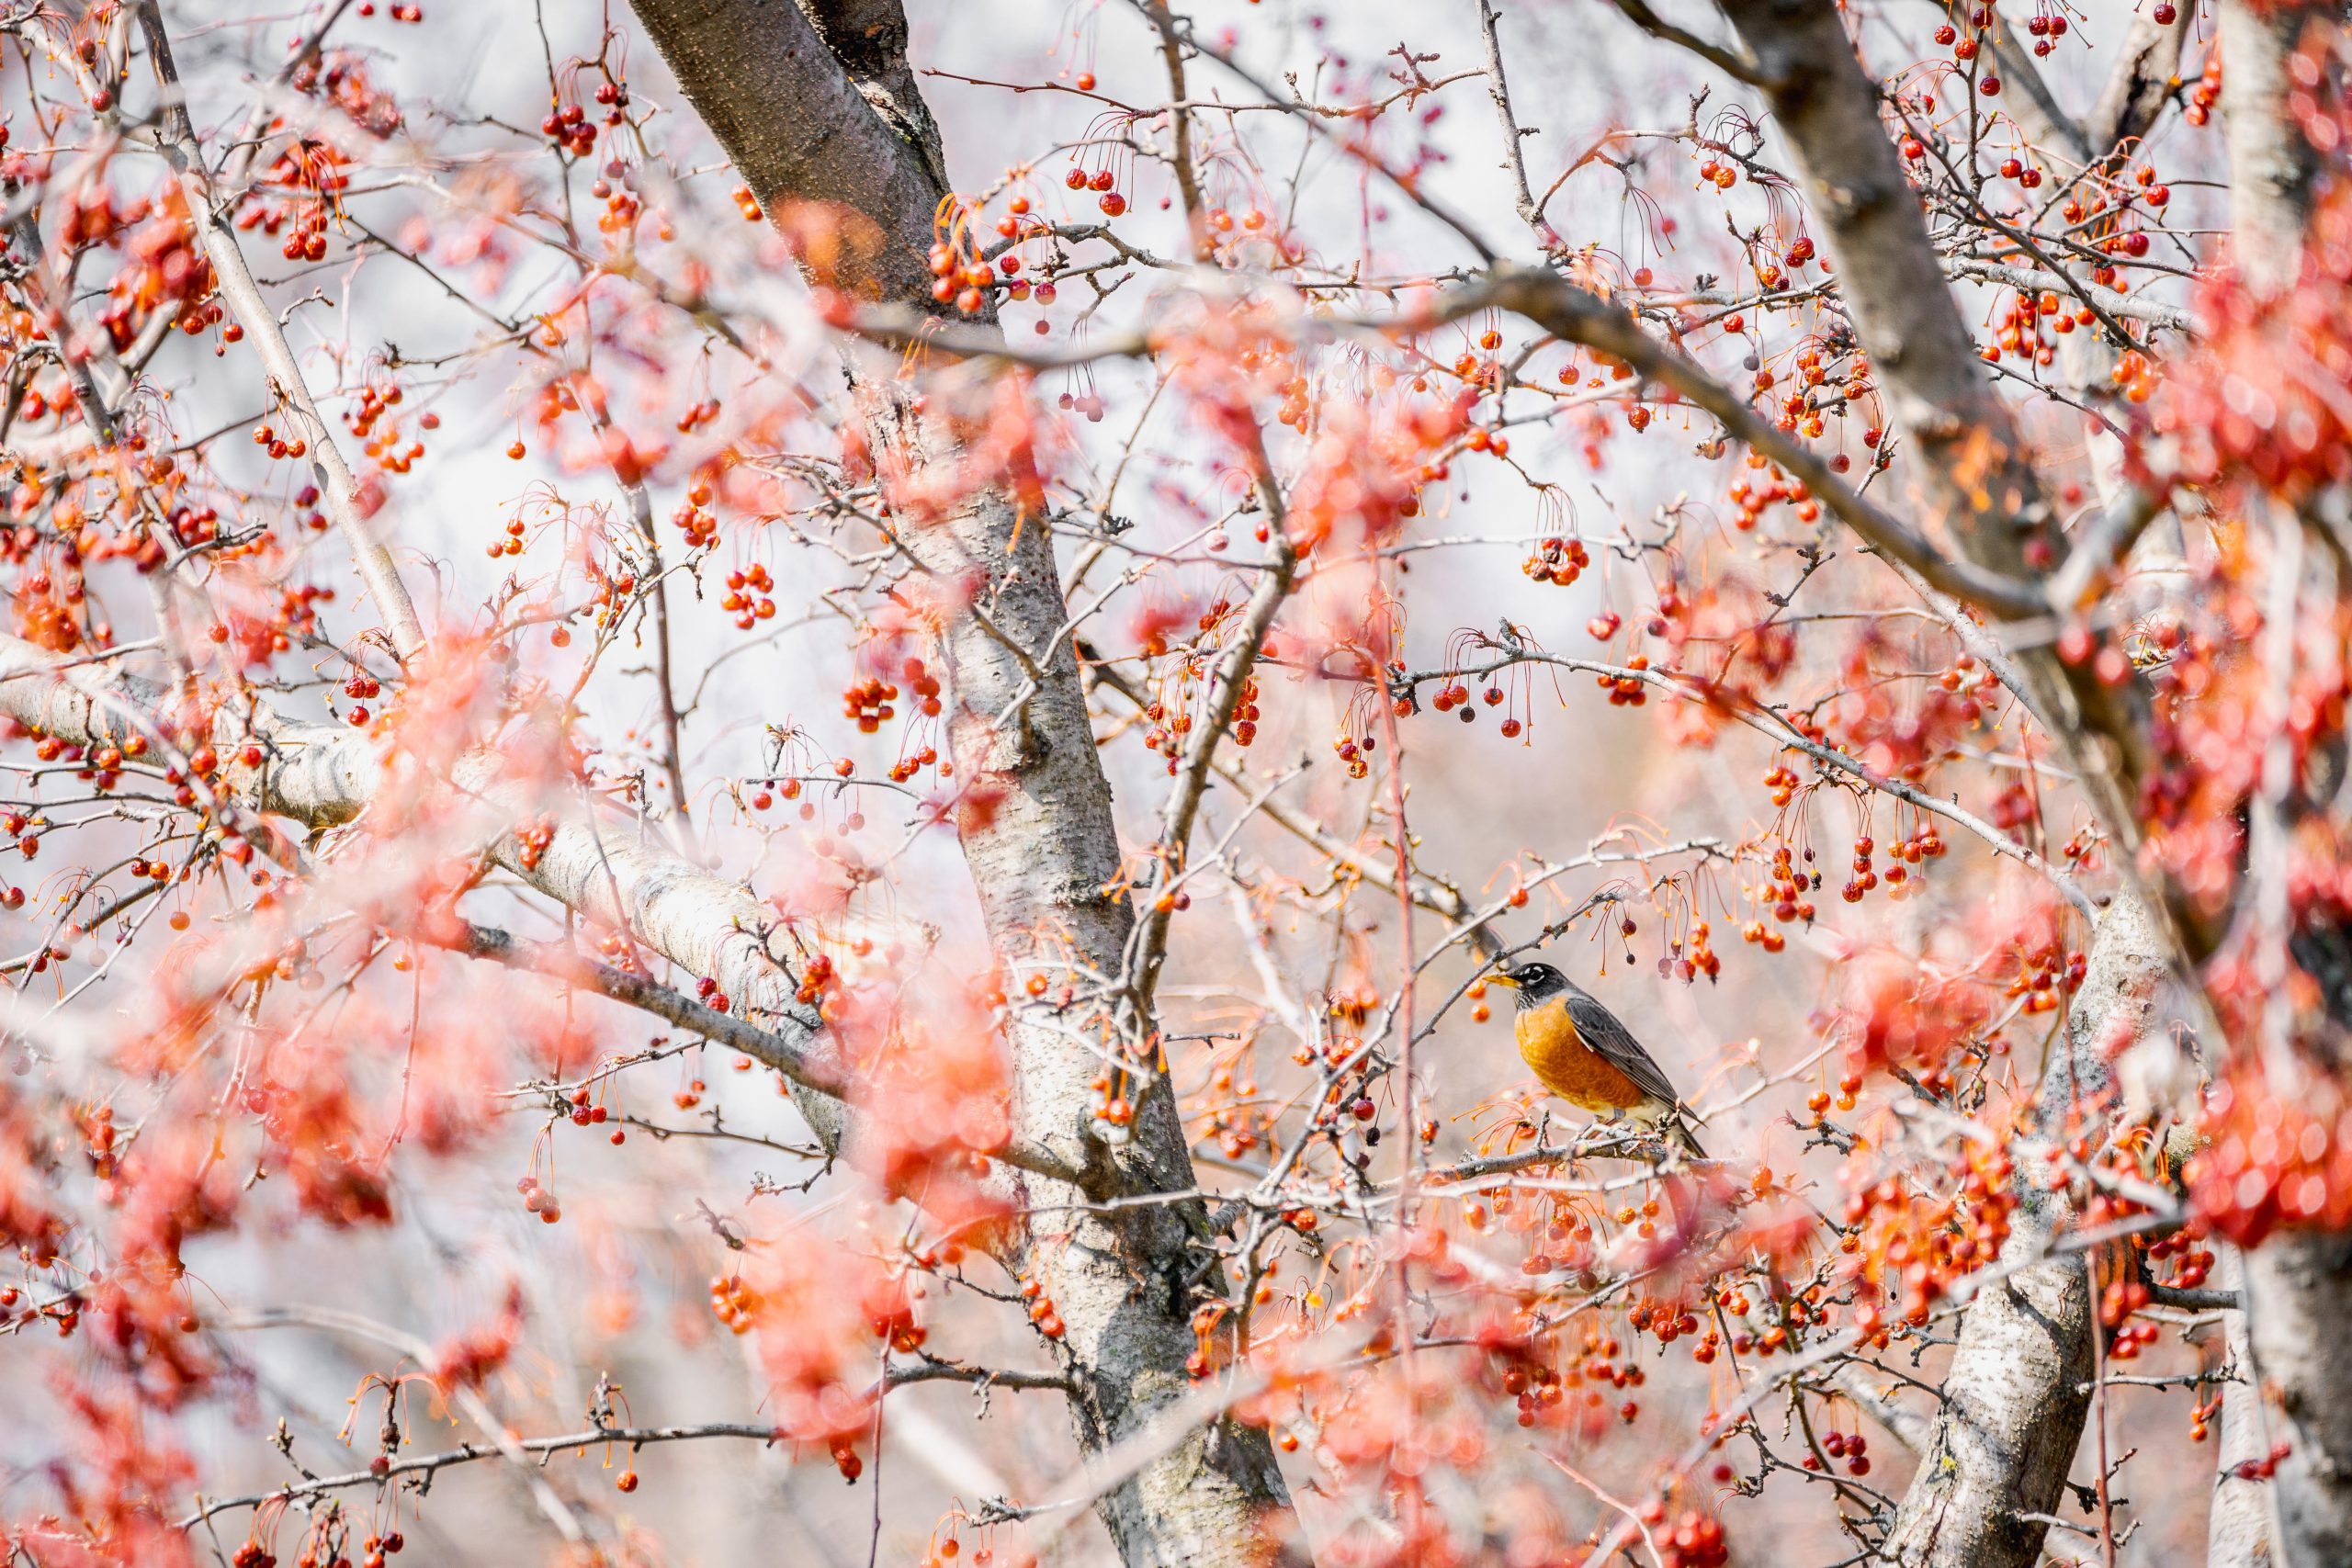 A brown and orange bird perches among a cloud of red berries on otherwise bare branches